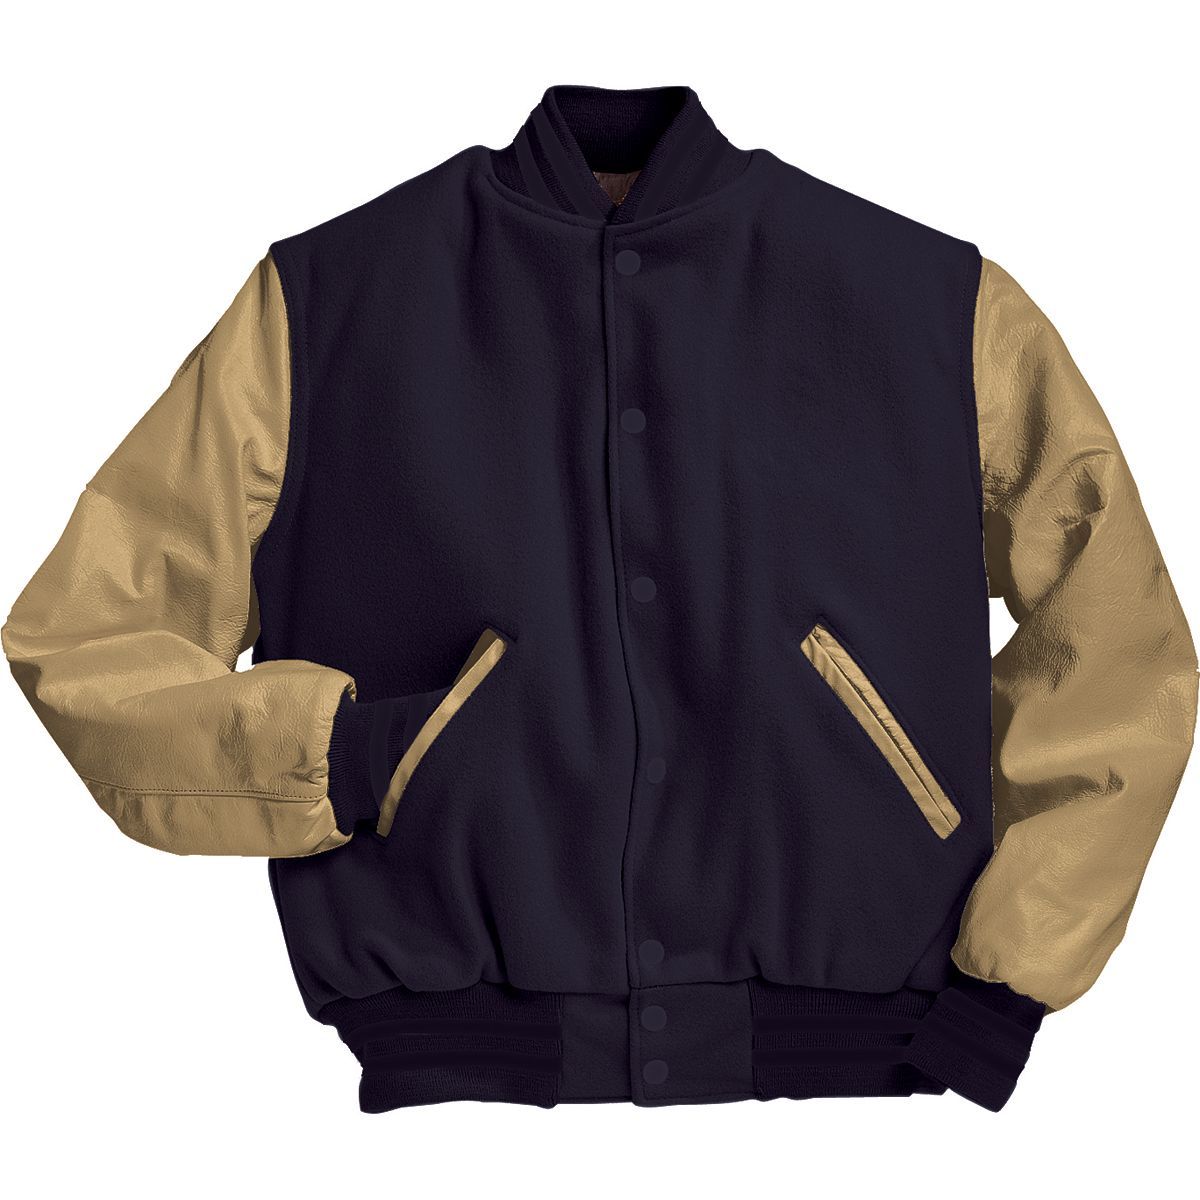 Holloway Award Jacket in Dark Navy/Cream  -Part of the Adult, Adult-Jacket, Holloway, Outerwear product lines at KanaleyCreations.com